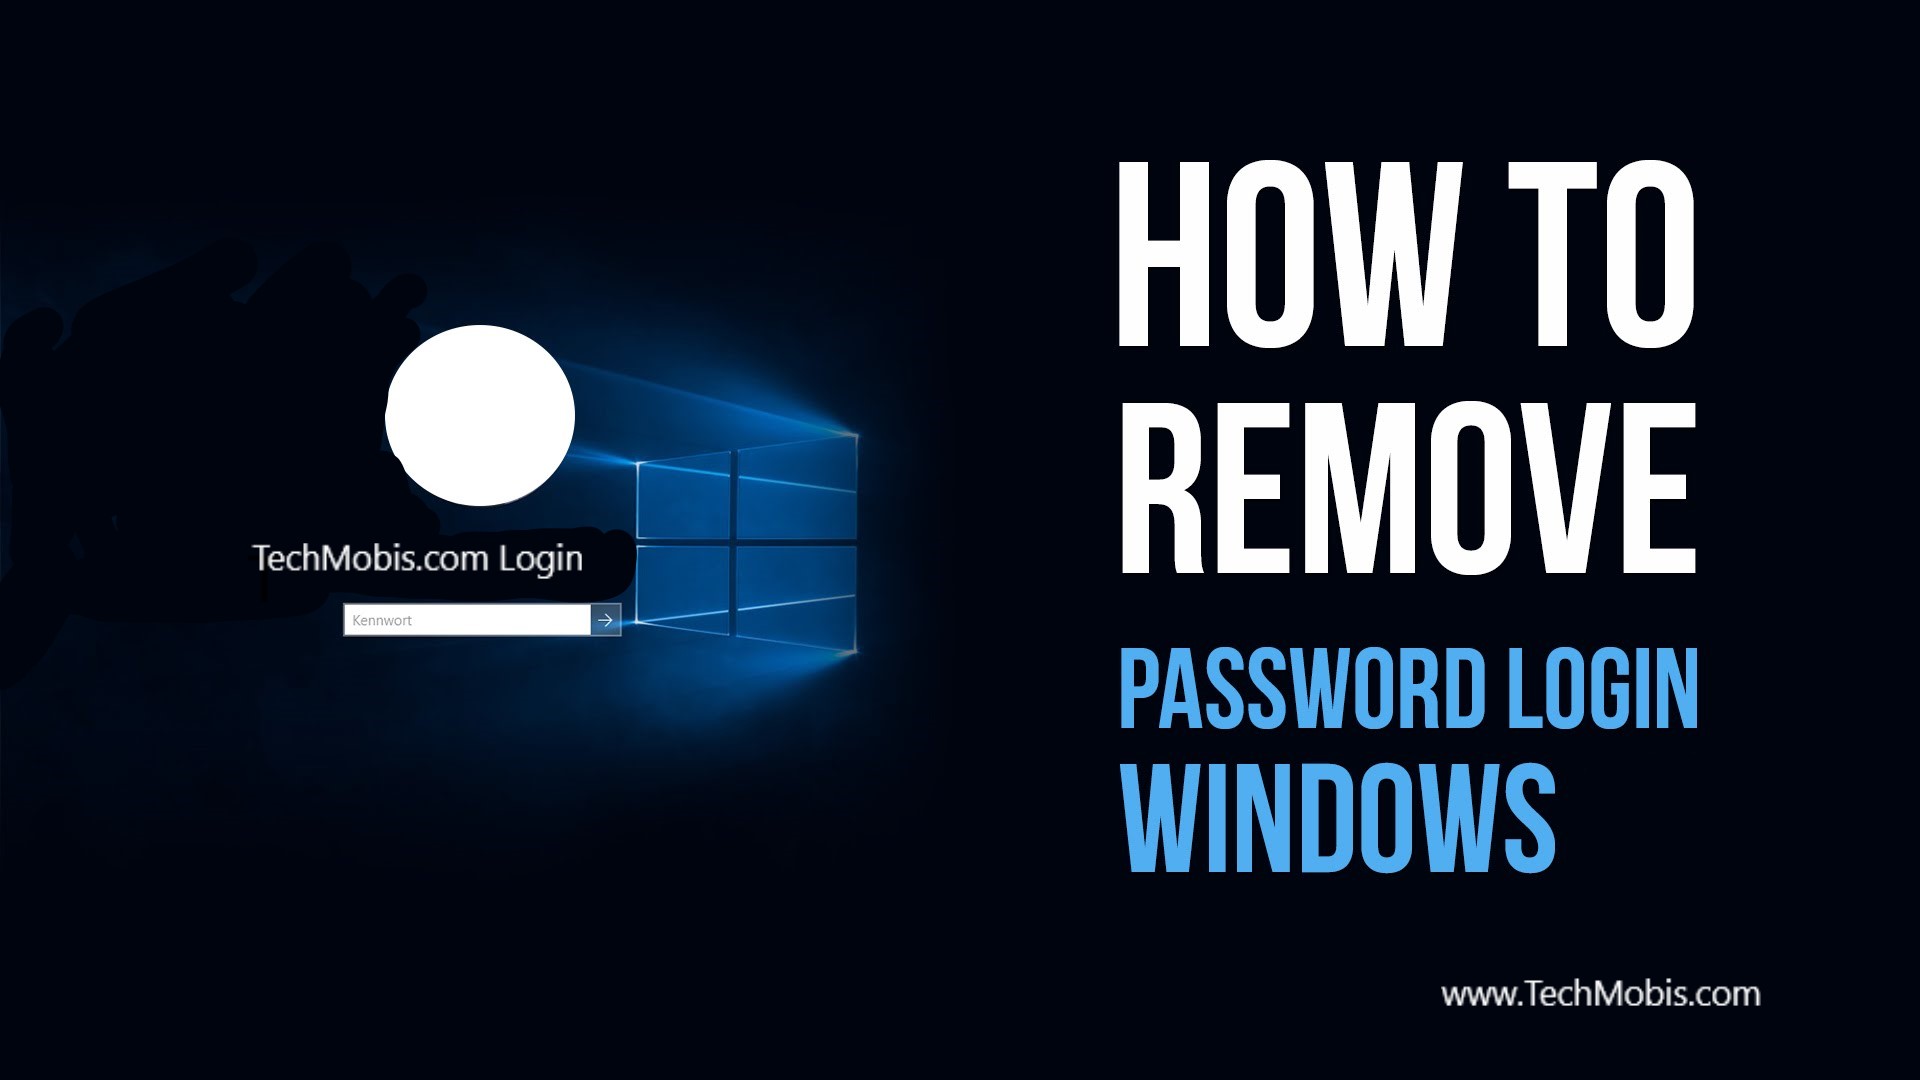 How to Bypass Windows 7 / 8 / 10 Login or Admin Password